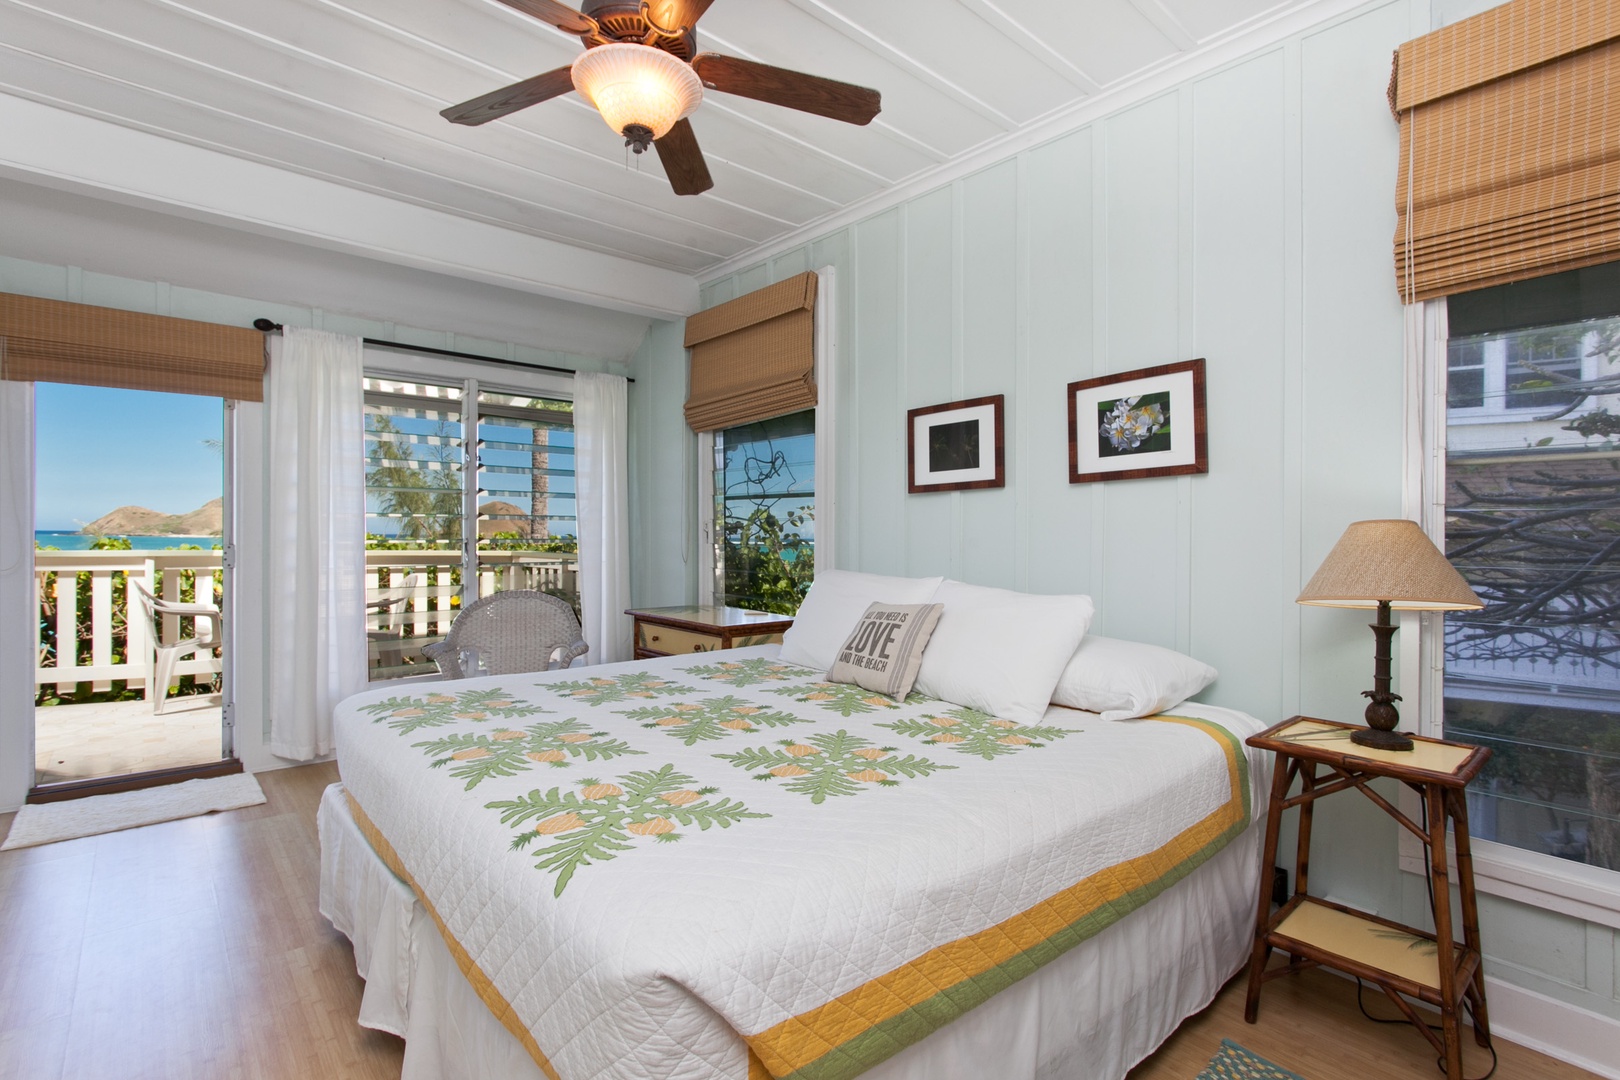 Kailua Vacation Rentals, Hale Kainalu* - Guest bedroom 1 features a king bed and access to your lanai.